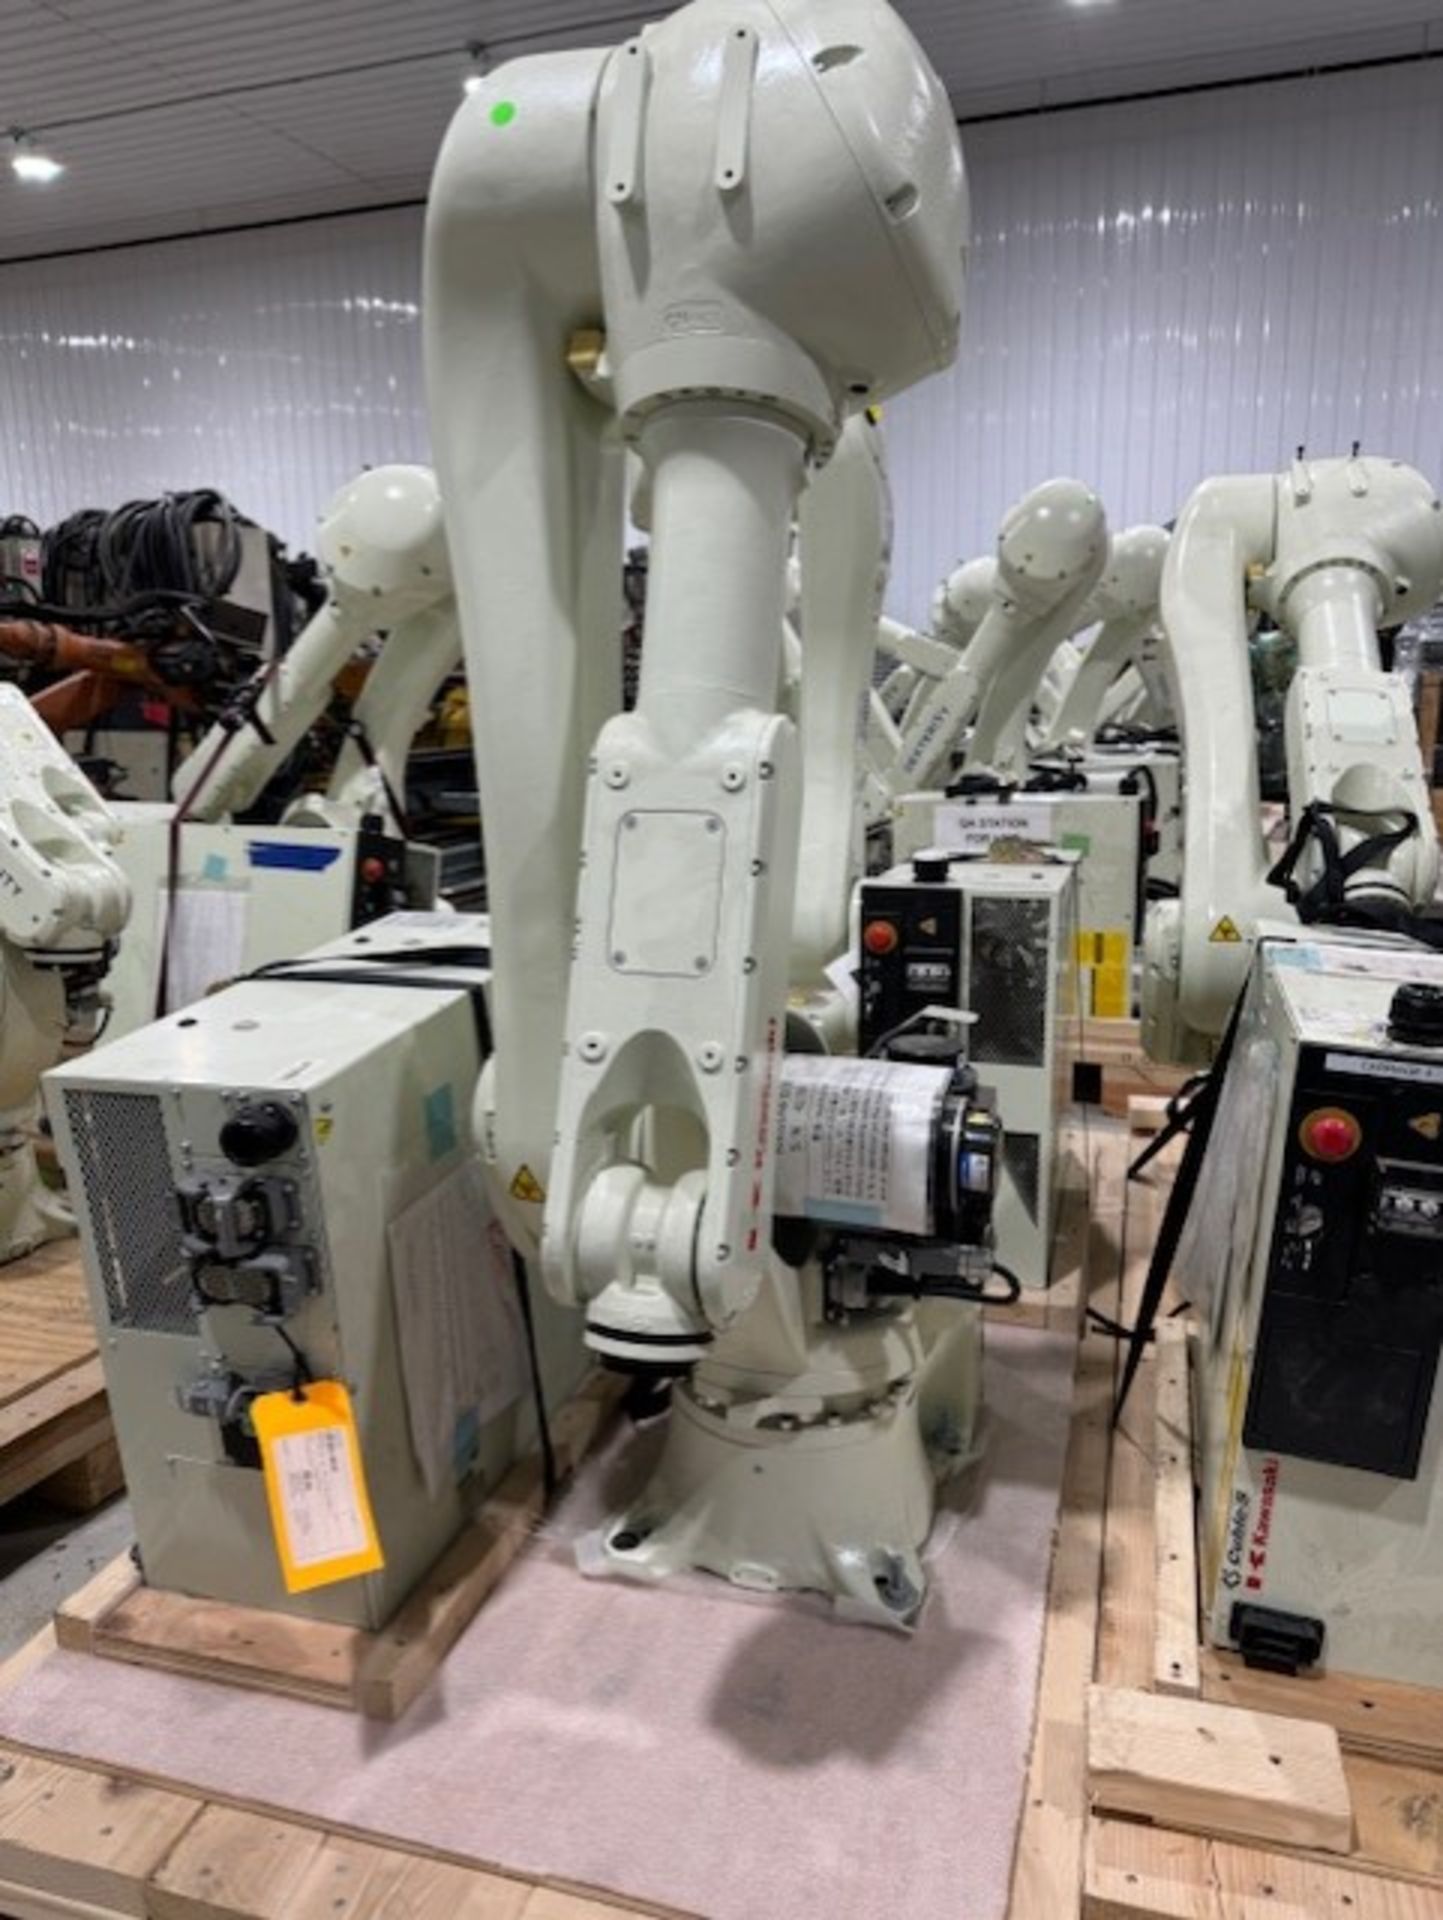 LIGHTLY USED KAWASAKI ROBOT RS020N, SN 4513, 20KG X 1725MM REACH WITH EO1 CONTROLS, CABLES & TEACH